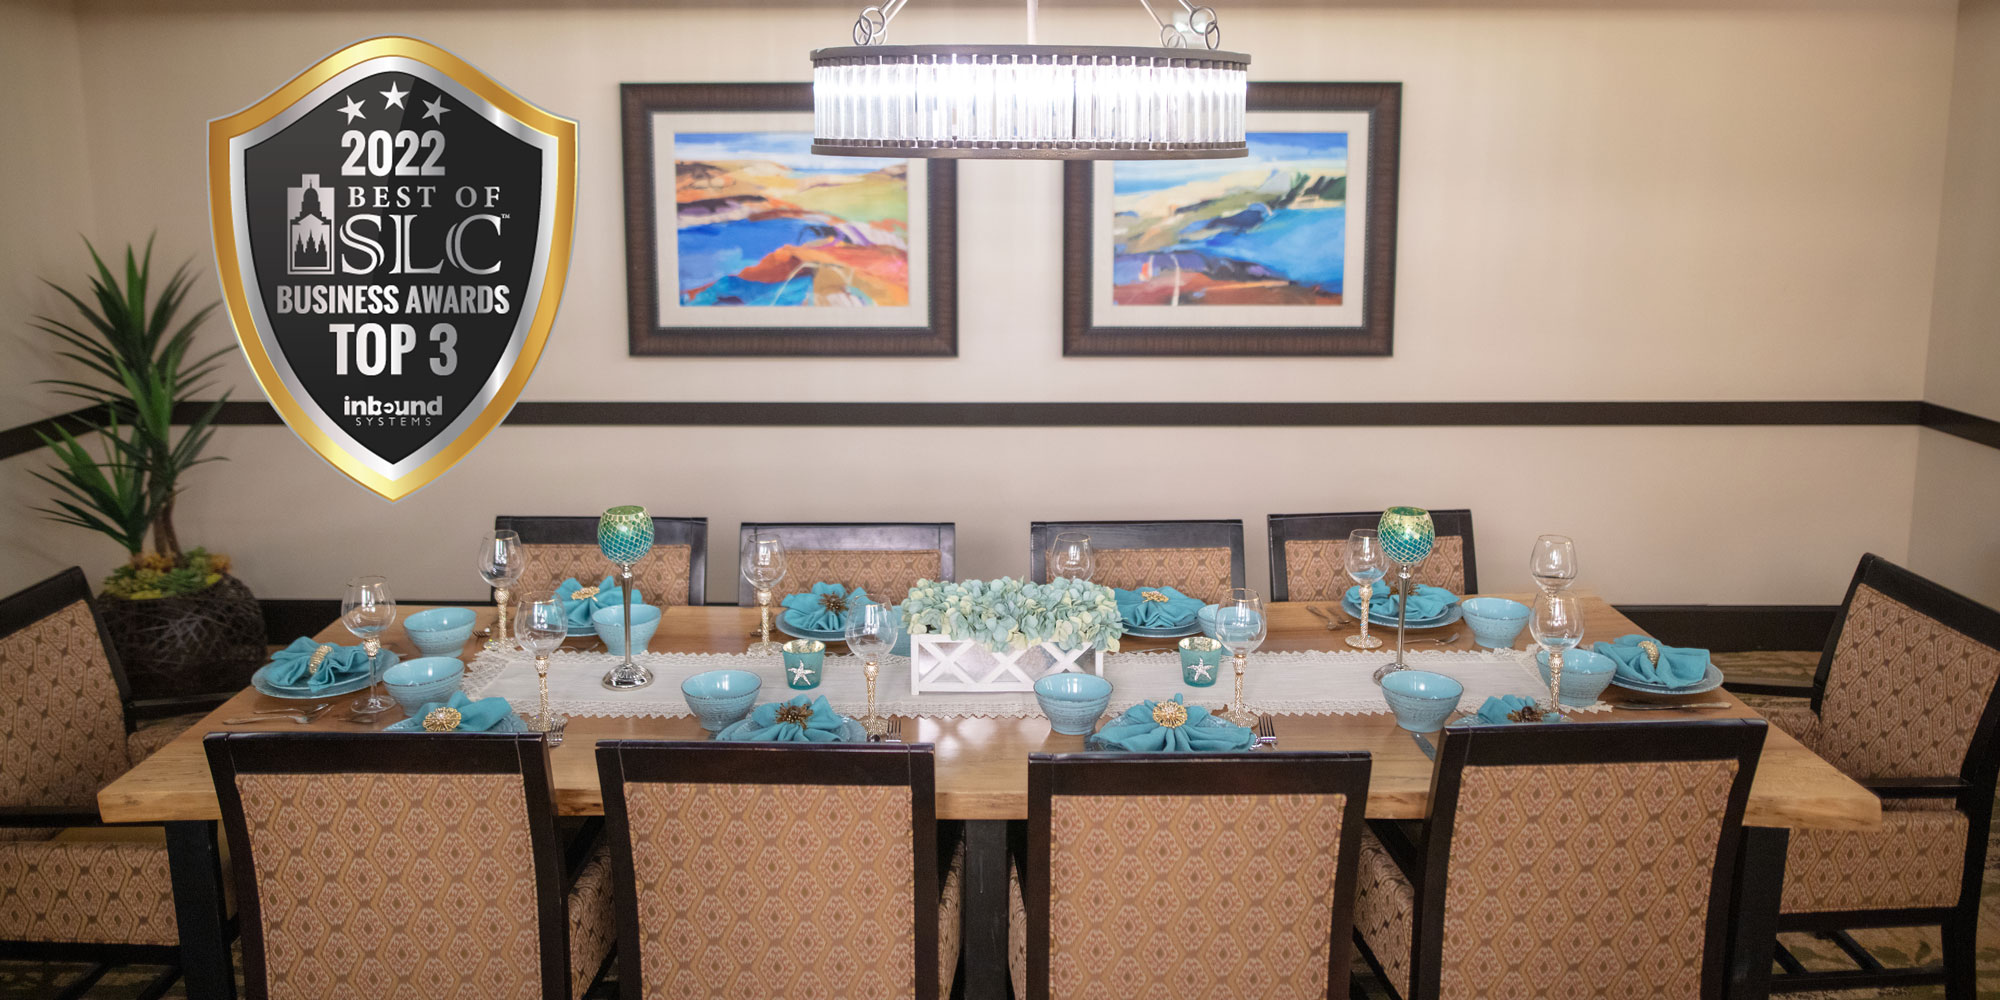 dining room image with 2022 Best of SLC Business Award